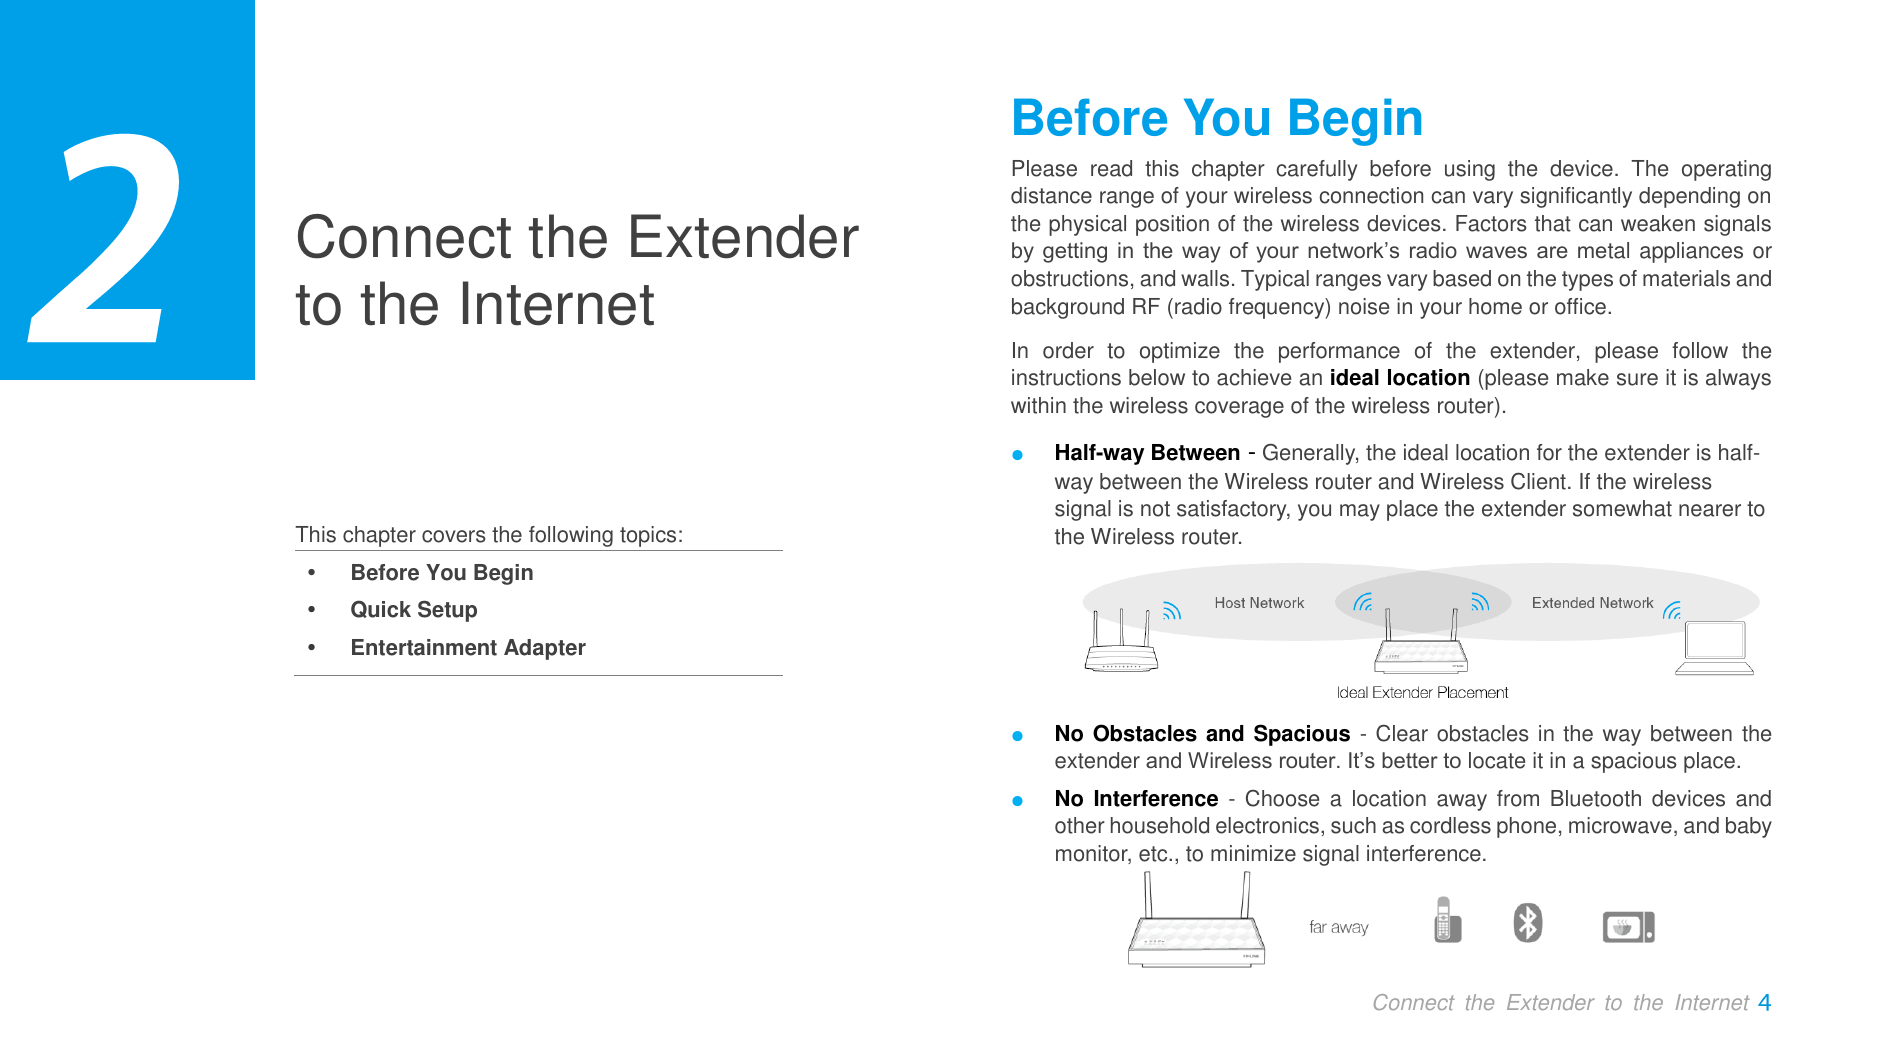  Connect  the  Extender  to  the  Internet  Connect the Extender to the Internet     This chapter covers the following topics:  Before You Begin  Quick Setup  Entertainment Adapter Before You Begin Please  read  this  chapter  carefully  before  using  the  device.  The  operating distance range of your wireless connection can vary significantly depending on the physical position of the wireless devices. Factors that can weaken signals by getting in the way of your network’s radio waves are metal appliances or obstructions, and walls. Typical ranges vary based on the types of materials and background RF (radio frequency) noise in your home or office. In  order  to  optimize  the  performance  of  the  extender,  please  follow  the instructions below to achieve an ideal location (please make sure it is always within the wireless coverage of the wireless router). ● Half-way Between - Generally, the ideal location for the extender is half-way between the Wireless router and Wireless Client. If the wireless signal is not satisfactory, you may place the extender somewhat nearer to the Wireless router.  ● No Obstacles and Spacious - Clear obstacles in the way between the extender and Wireless router. It’s better to locate it in a spacious place. ● No Interference - Choose a location away from Bluetooth devices and other household electronics, such as cordless phone, microwave, and baby monitor, etc., to minimize signal interference.   